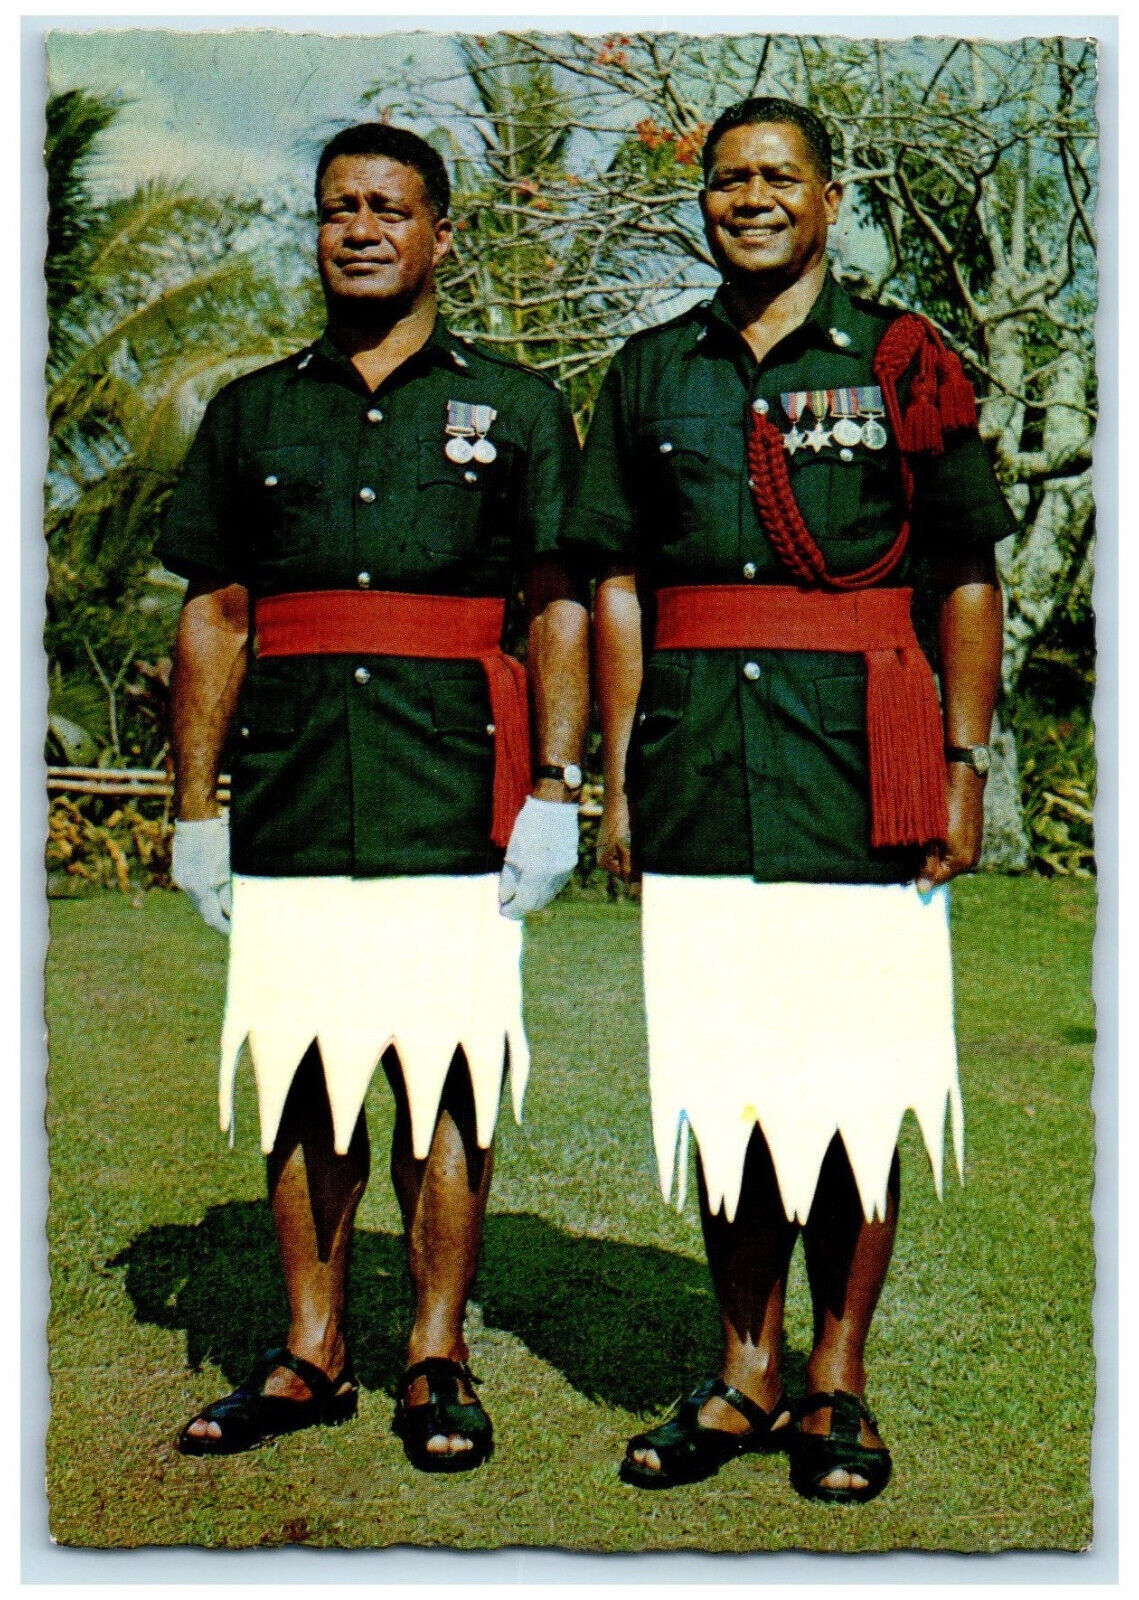 1972 Smiling Two Members of Royal Fiji Police Band Posted Vintage Postcard